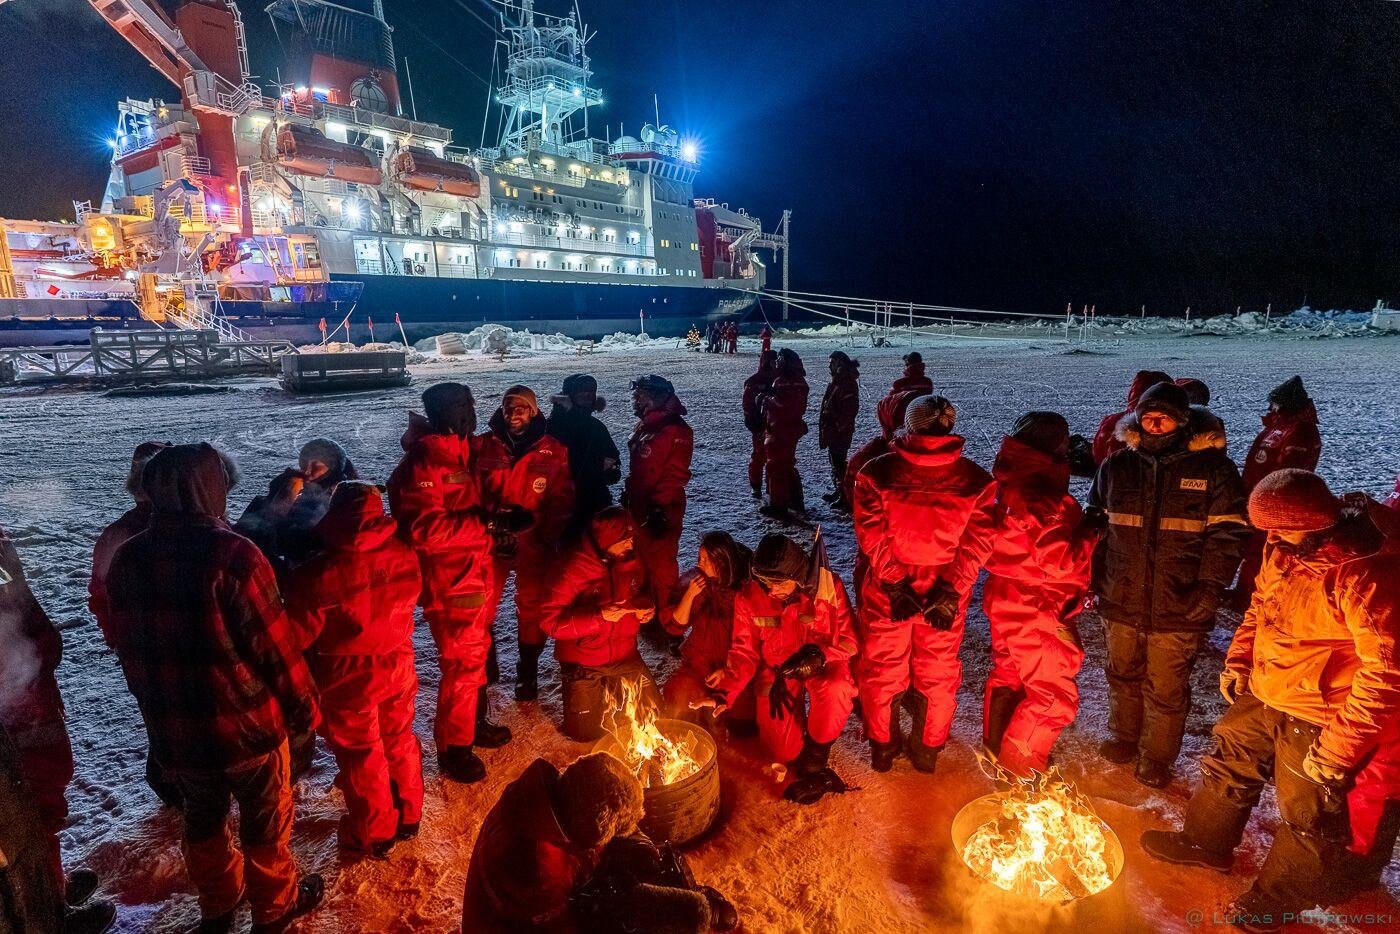 Researchers gathered around camp fire. Polarstern is seen in the background.